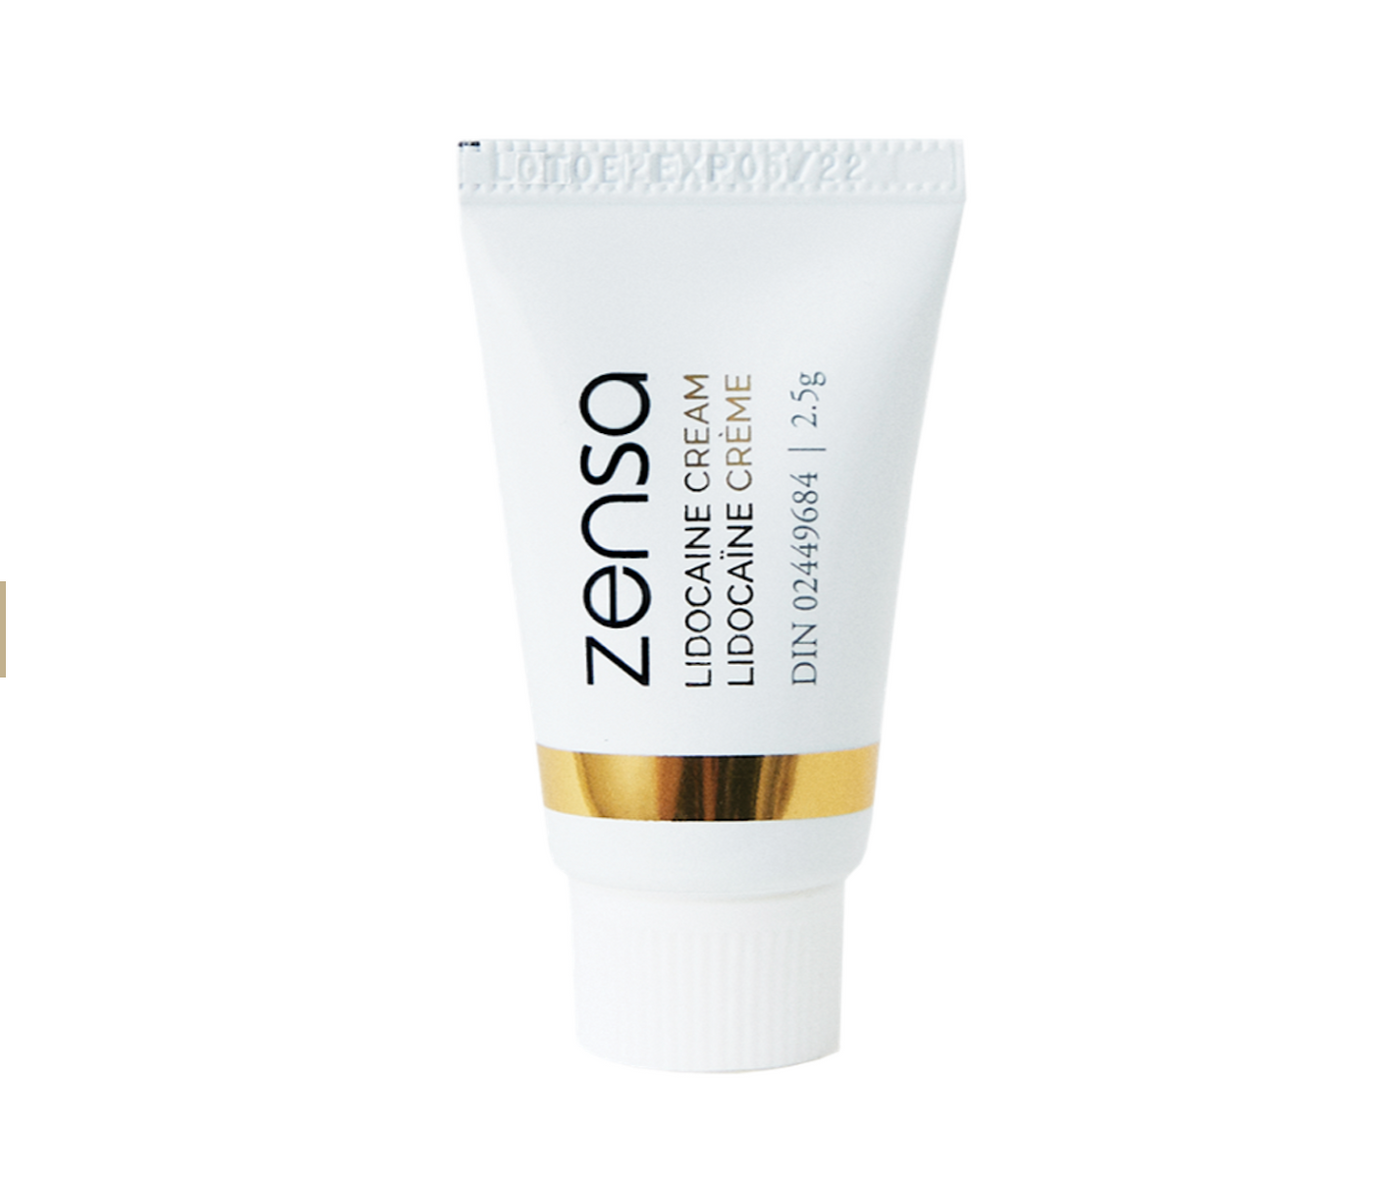 Zensa Numbing Cream  Why So Many Artists Love It